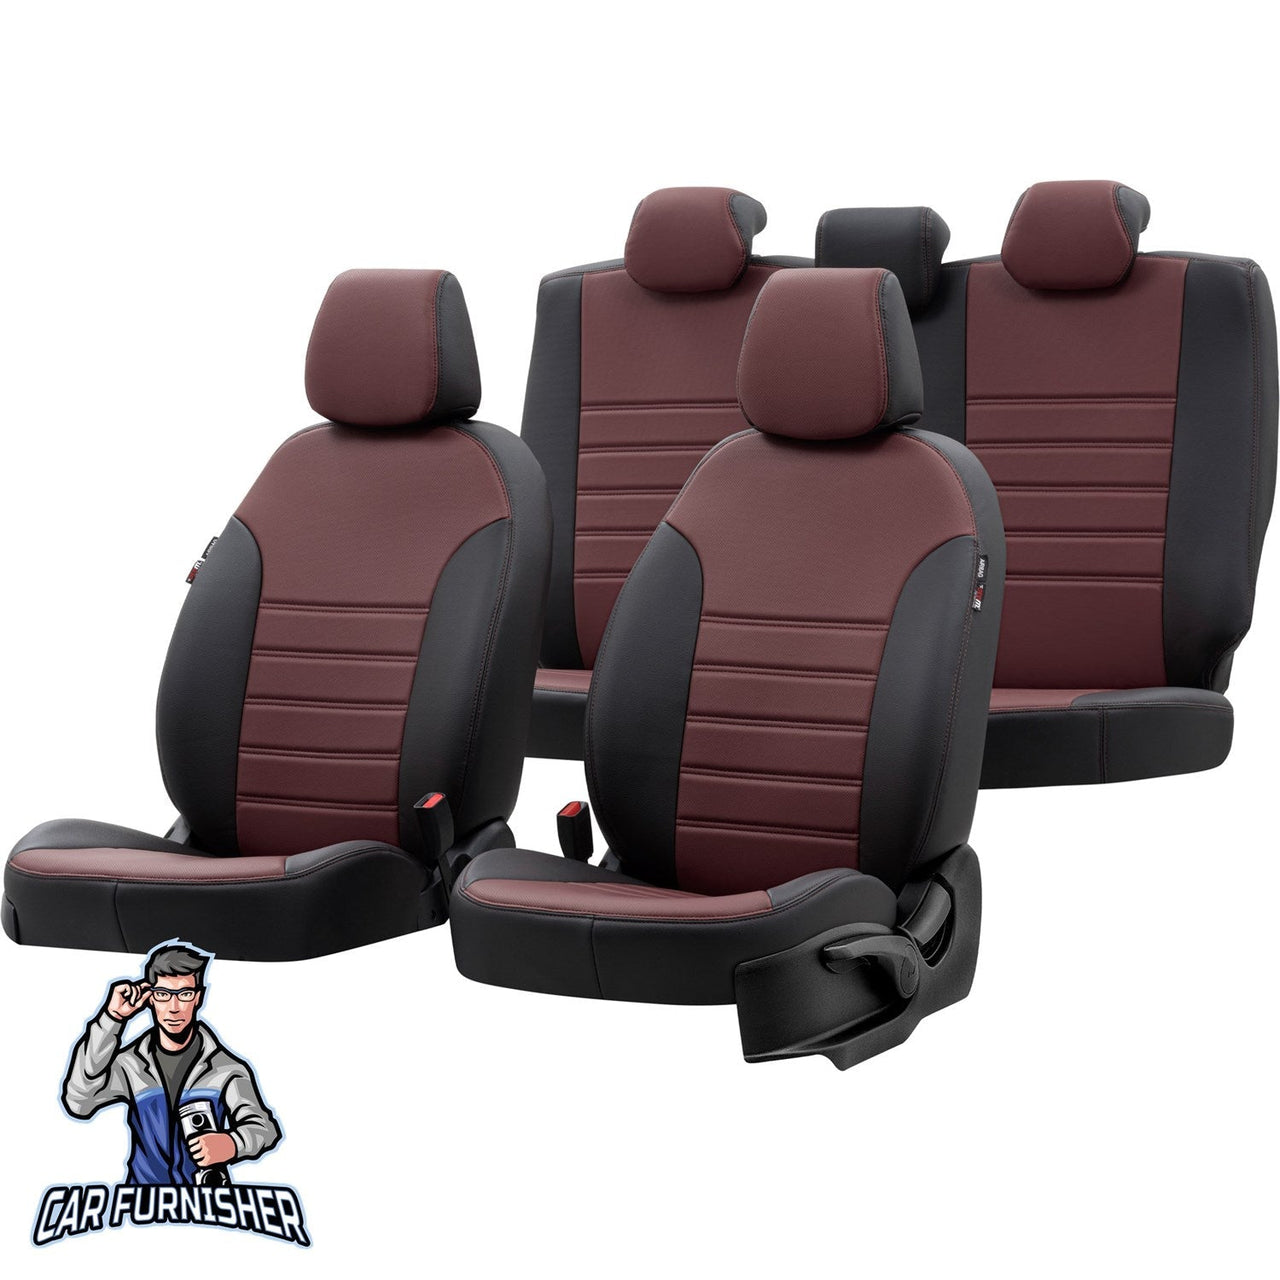 Chevrolet Captiva Seat Cover Istanbul Leather Design Burgundy Leather